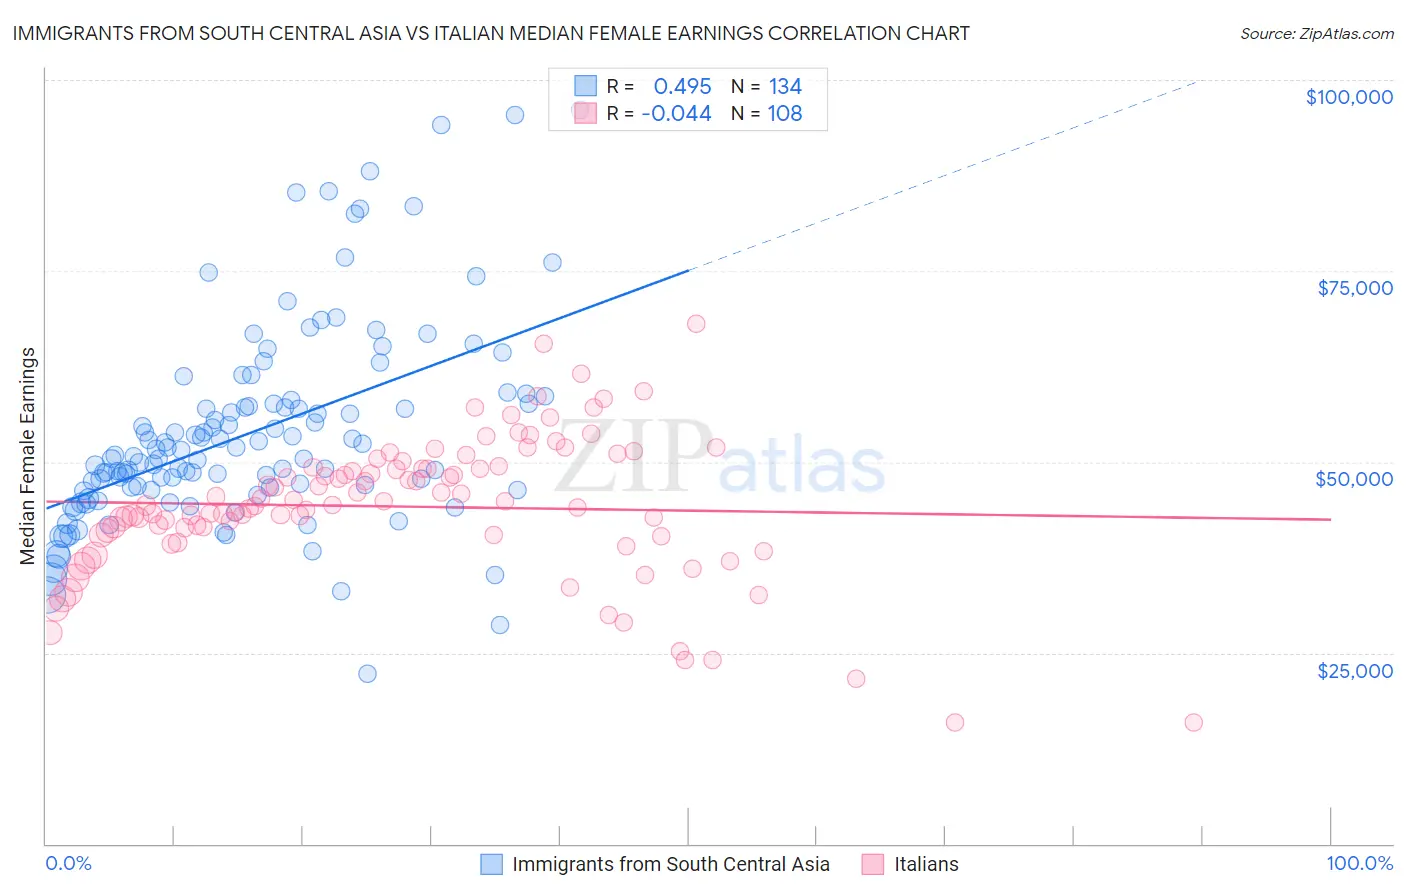 Immigrants from South Central Asia vs Italian Median Female Earnings